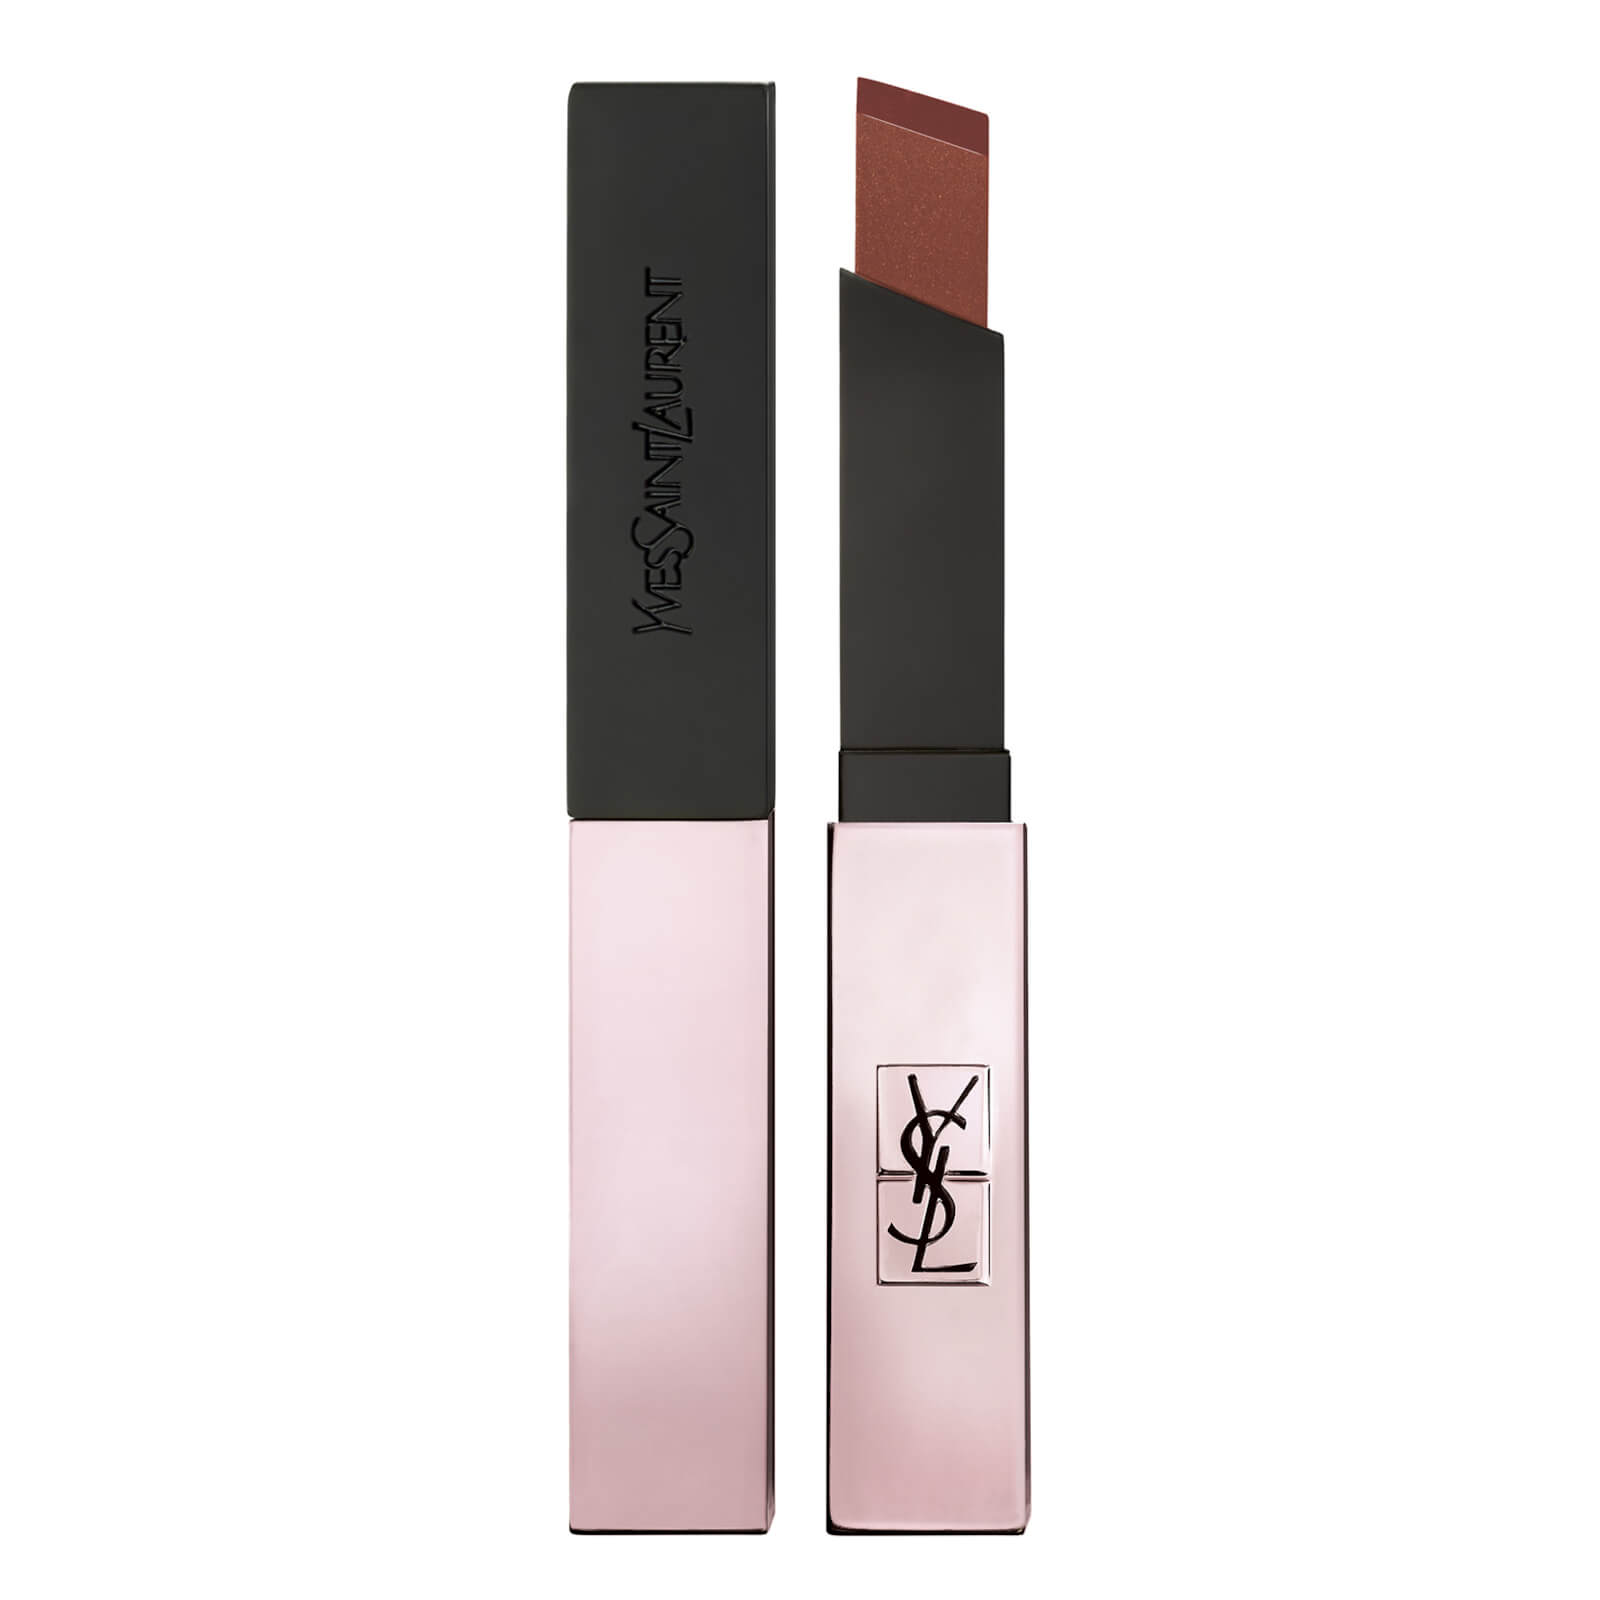 Yves Saint Laurent Rouge Pur Couture The Slim Glow Matte Lipstick 2g (Various Shades) - 212 Brown Out of Contro